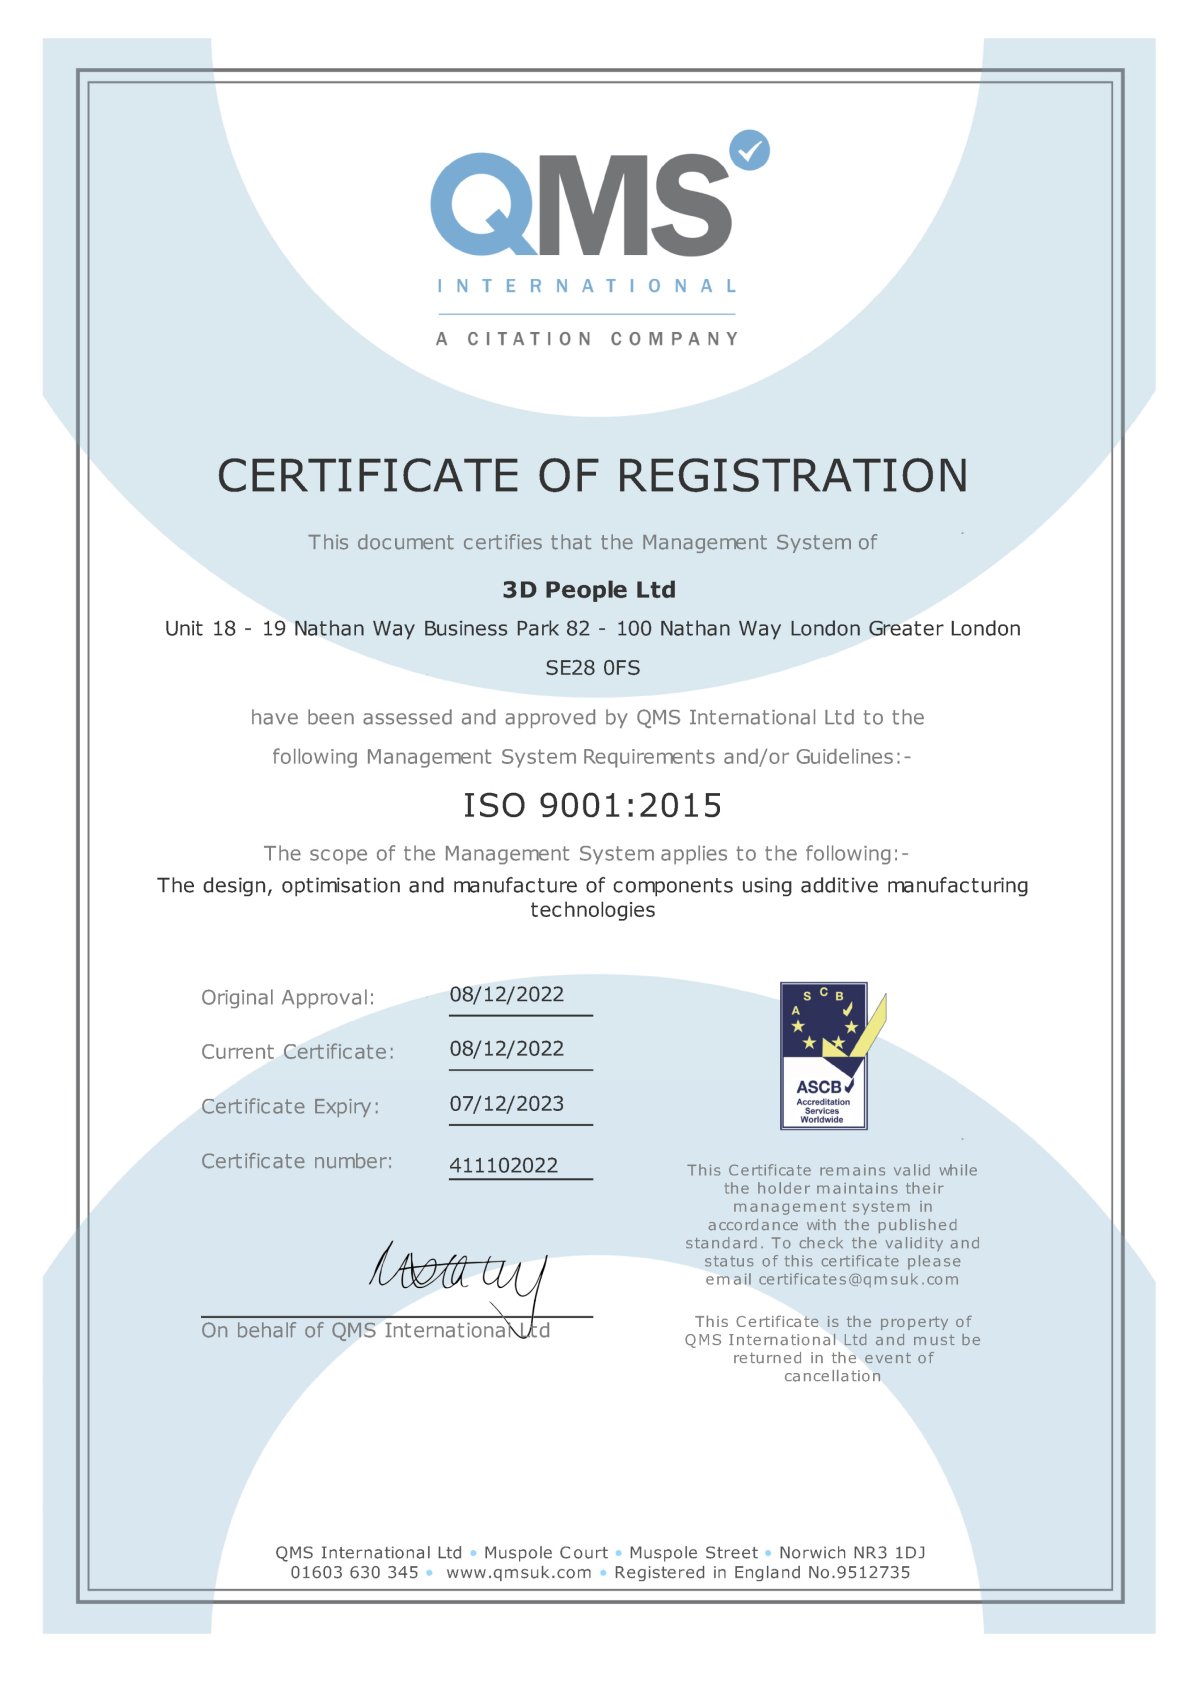 3D People’s commitment to quality shines through with ISO 9001:2015 ...